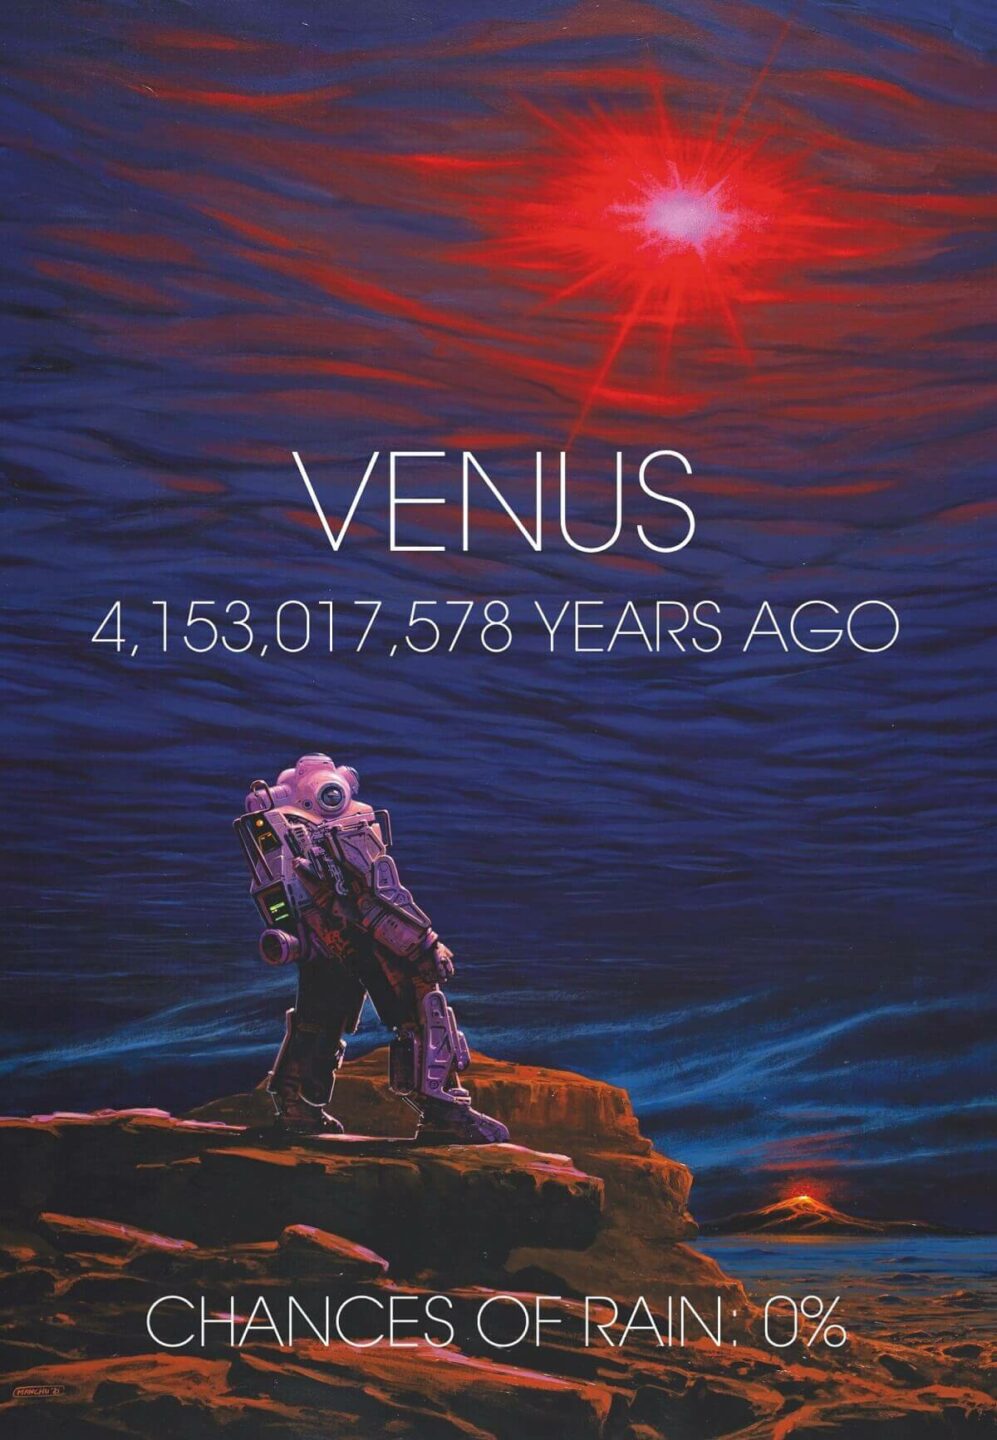 An illustrated poster showing a person in a spacesuit on the surface of venus